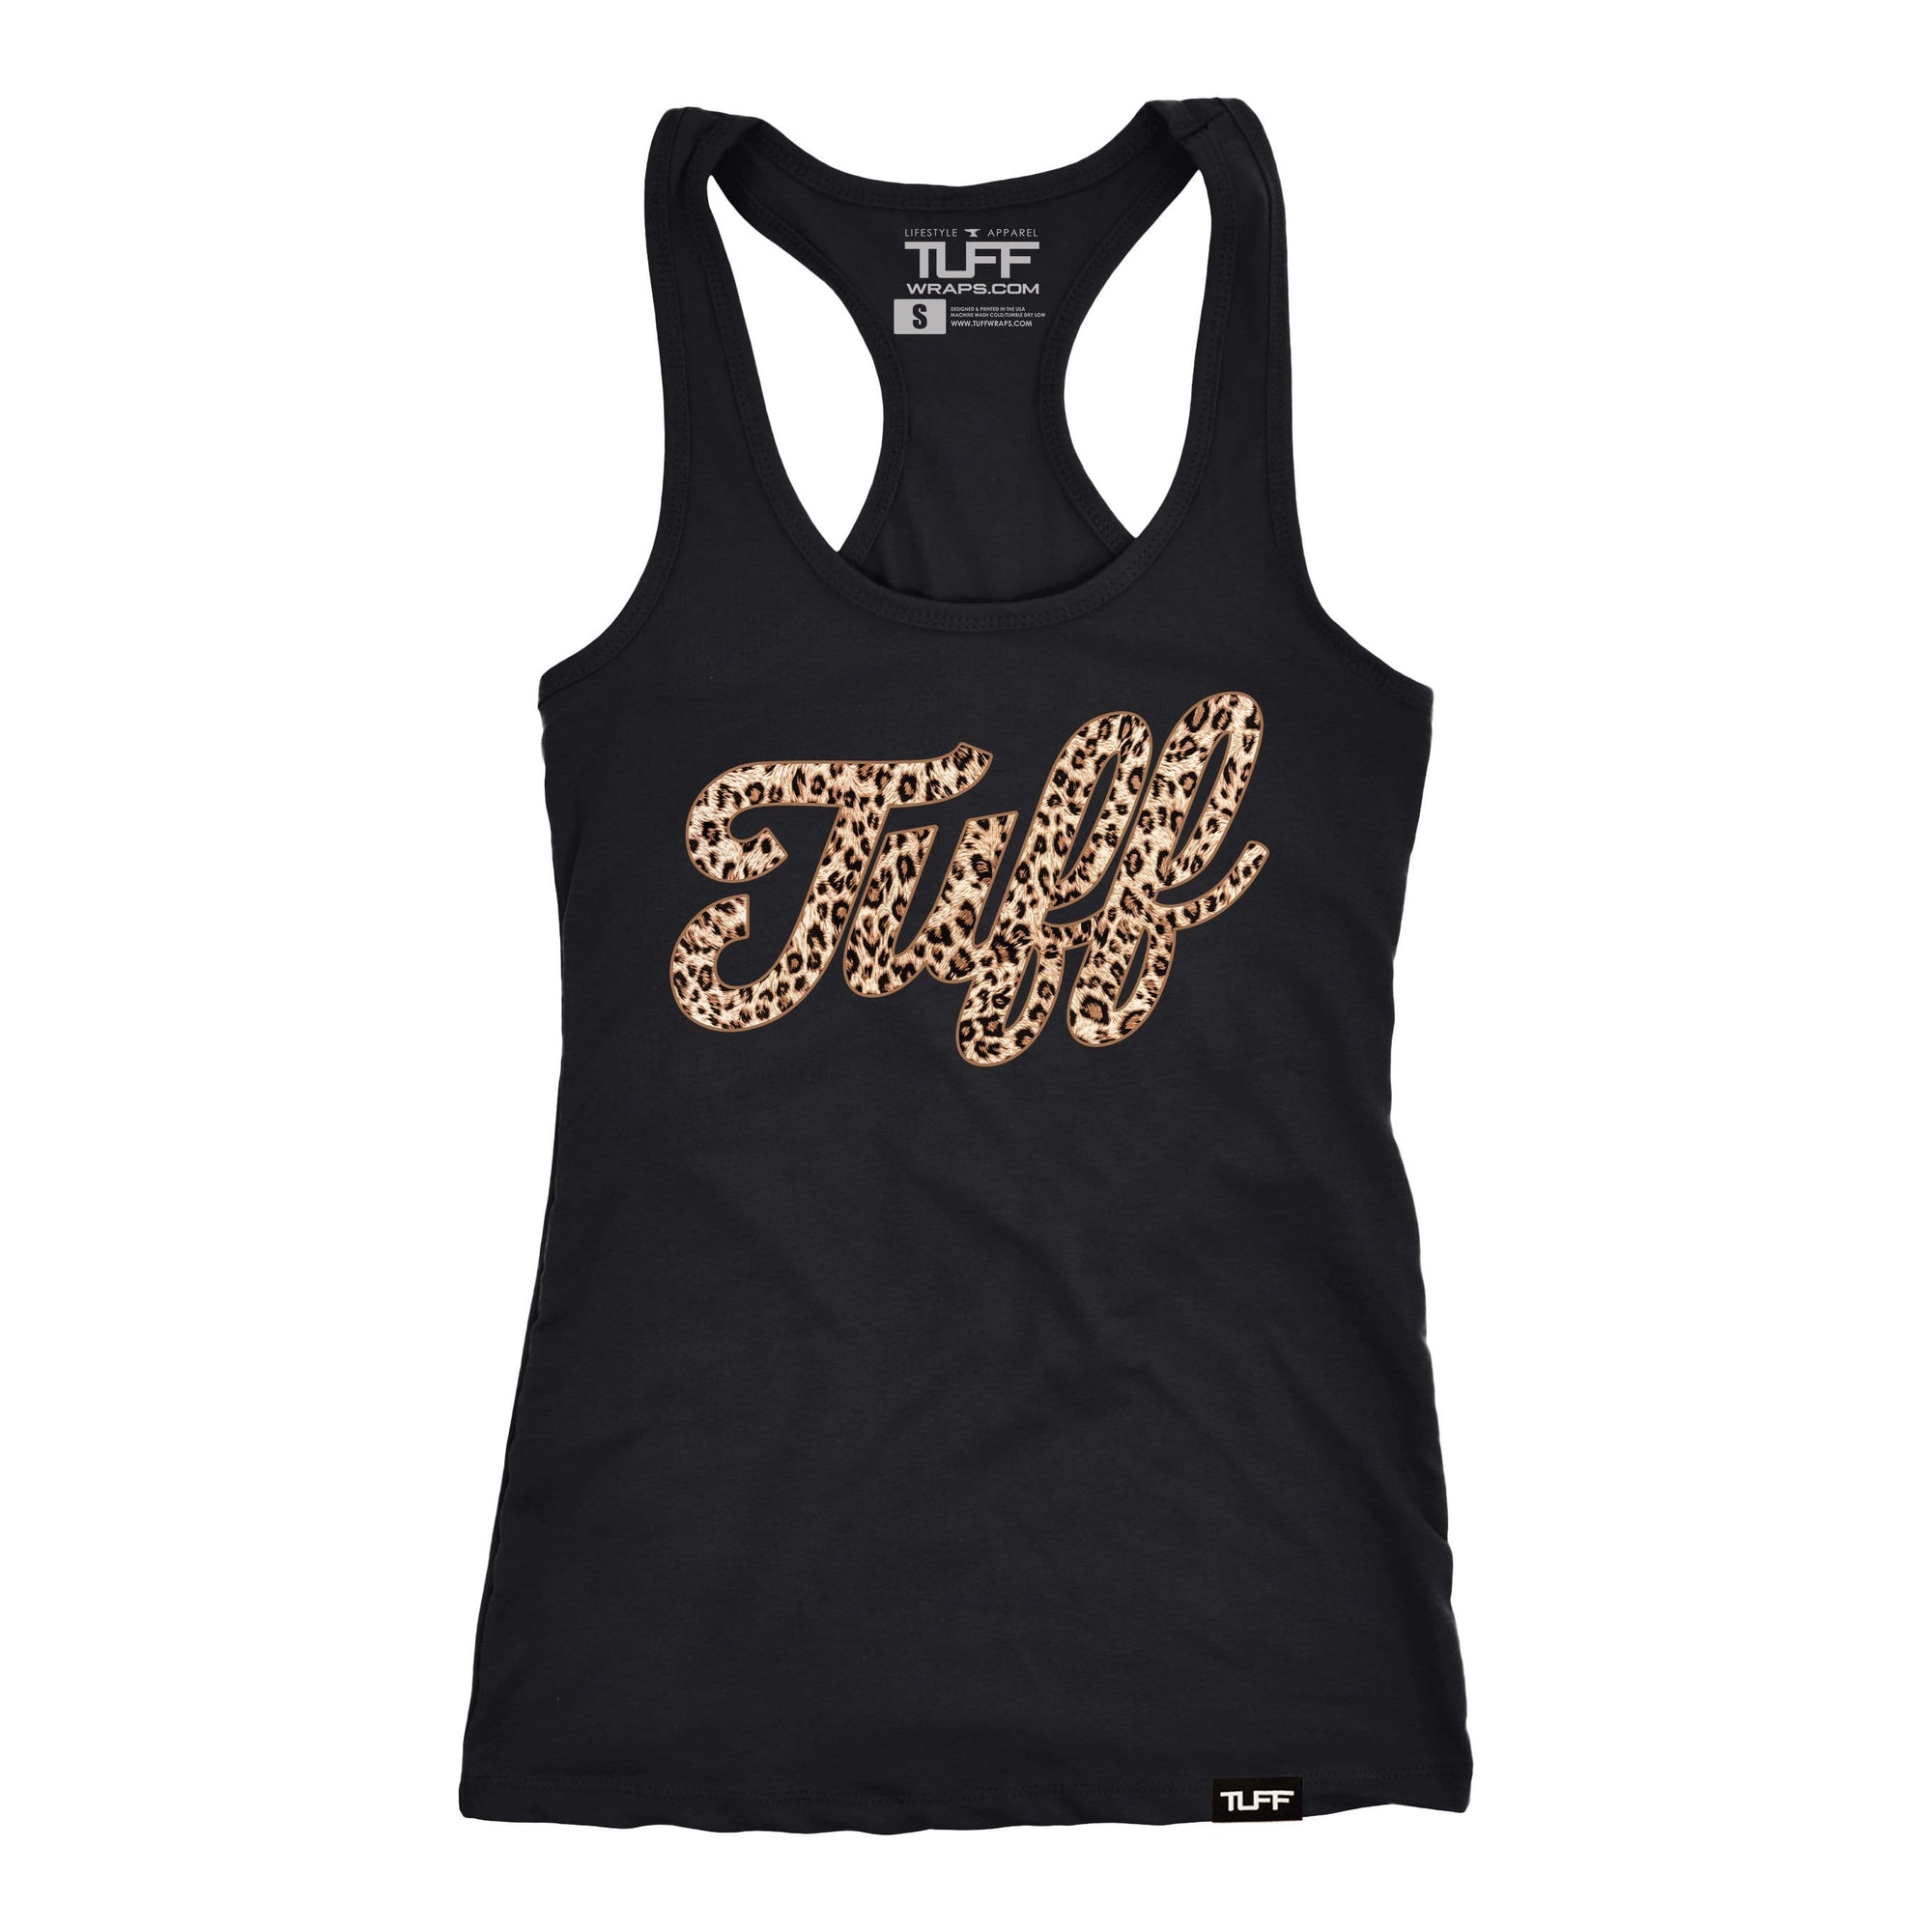 Women's Workout, CrossFit, & Weightlifting Tank Tops 